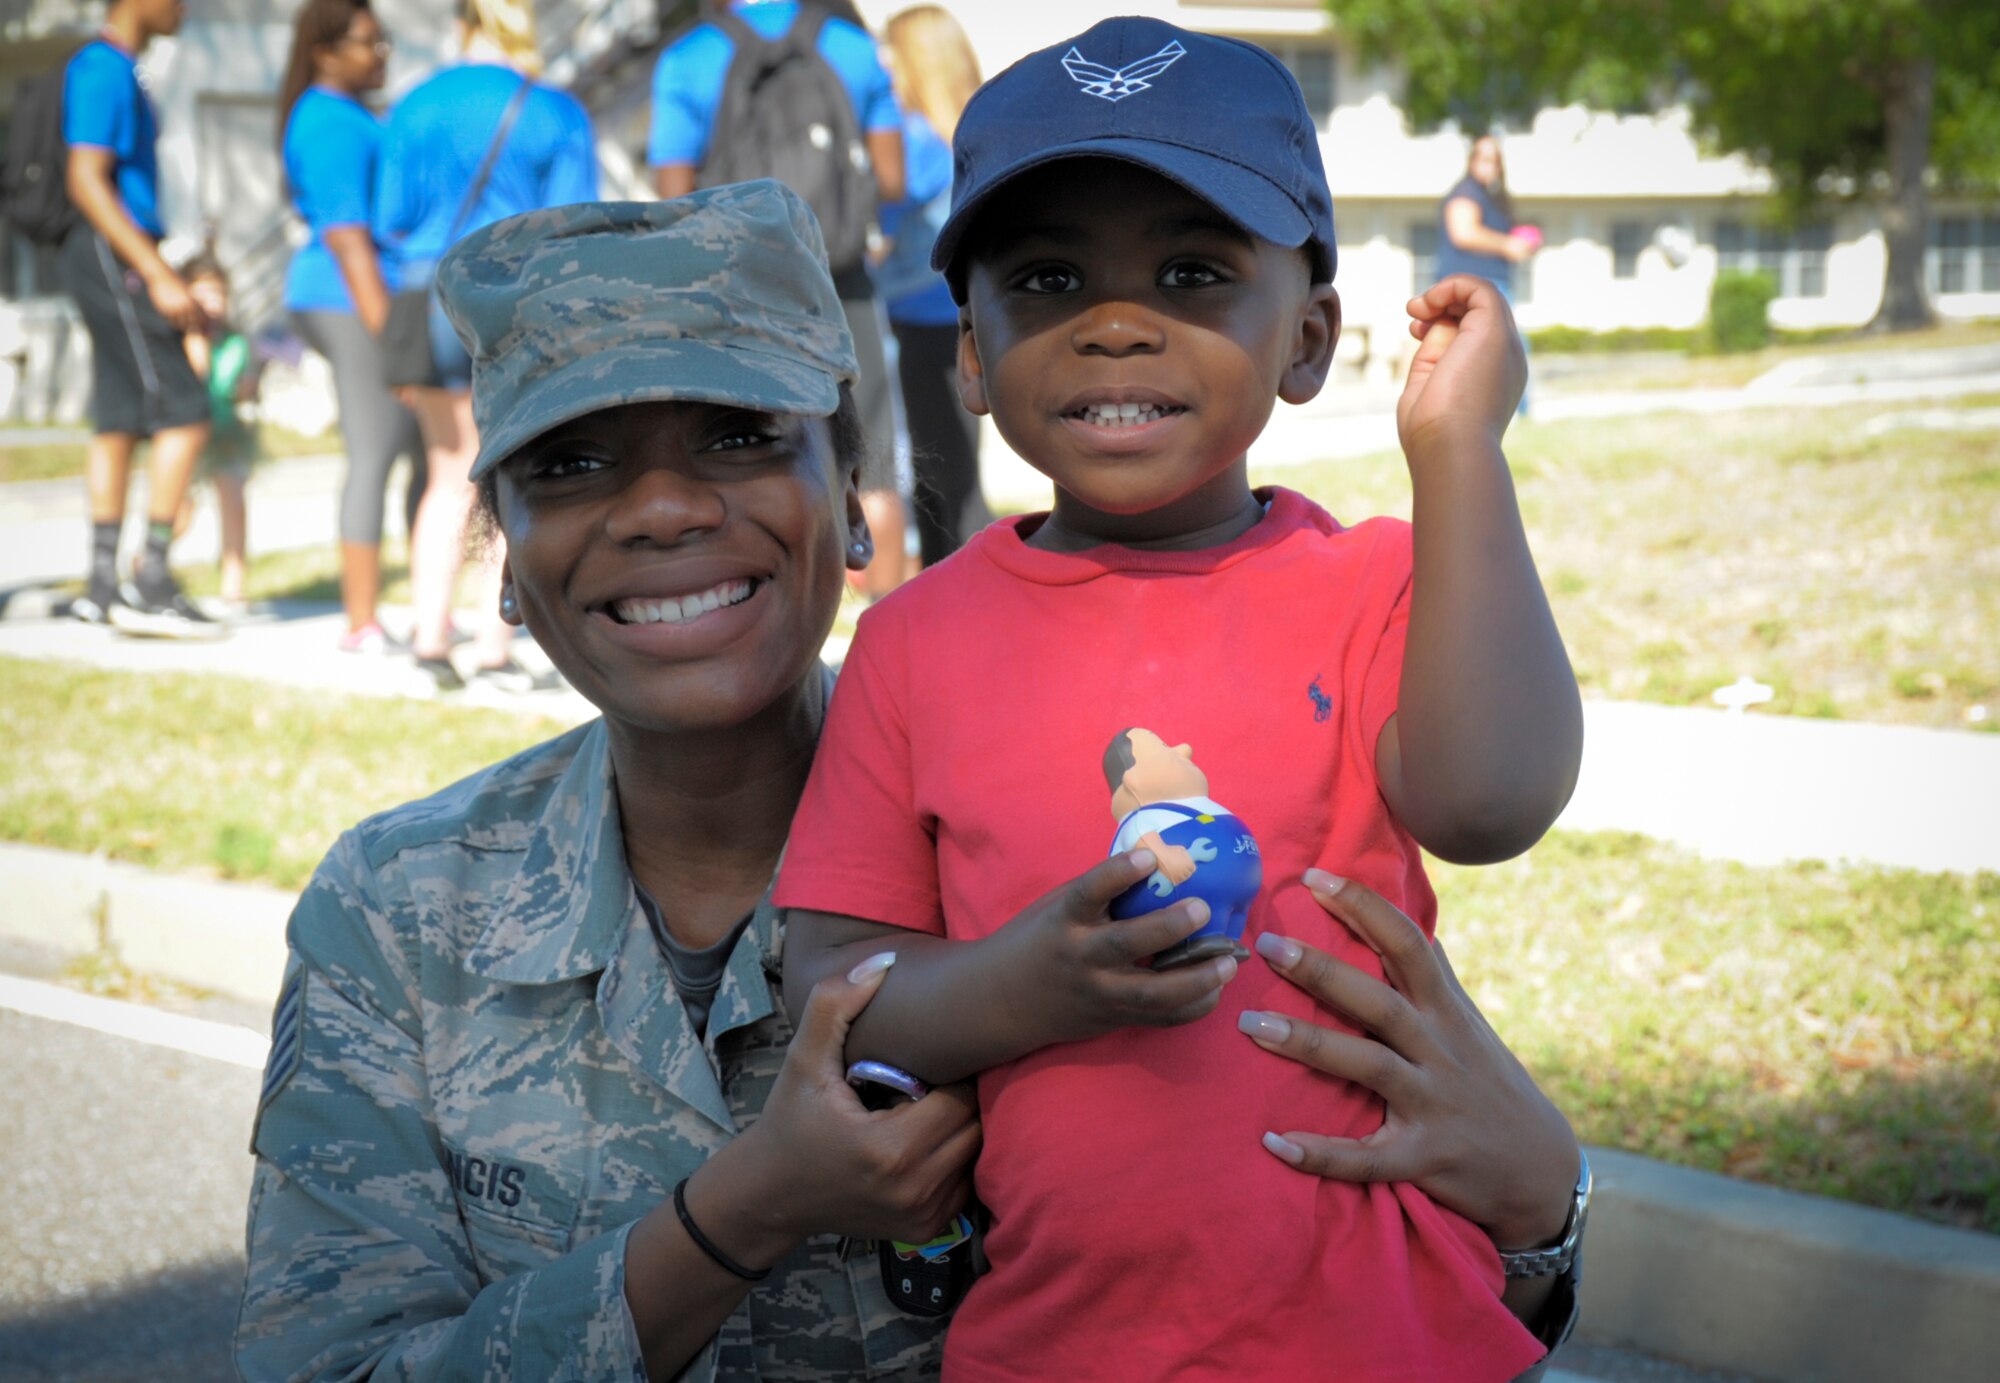 A parent and child pause for a photo after the Month of the Military Child parade at MacDill Air Force Base, Fla., April 21, 2017. Parents throughout the base came out to show their support and walk in the parade with their children. (U.S. Air Force photo by Airman 1st Class Mariette Adams)